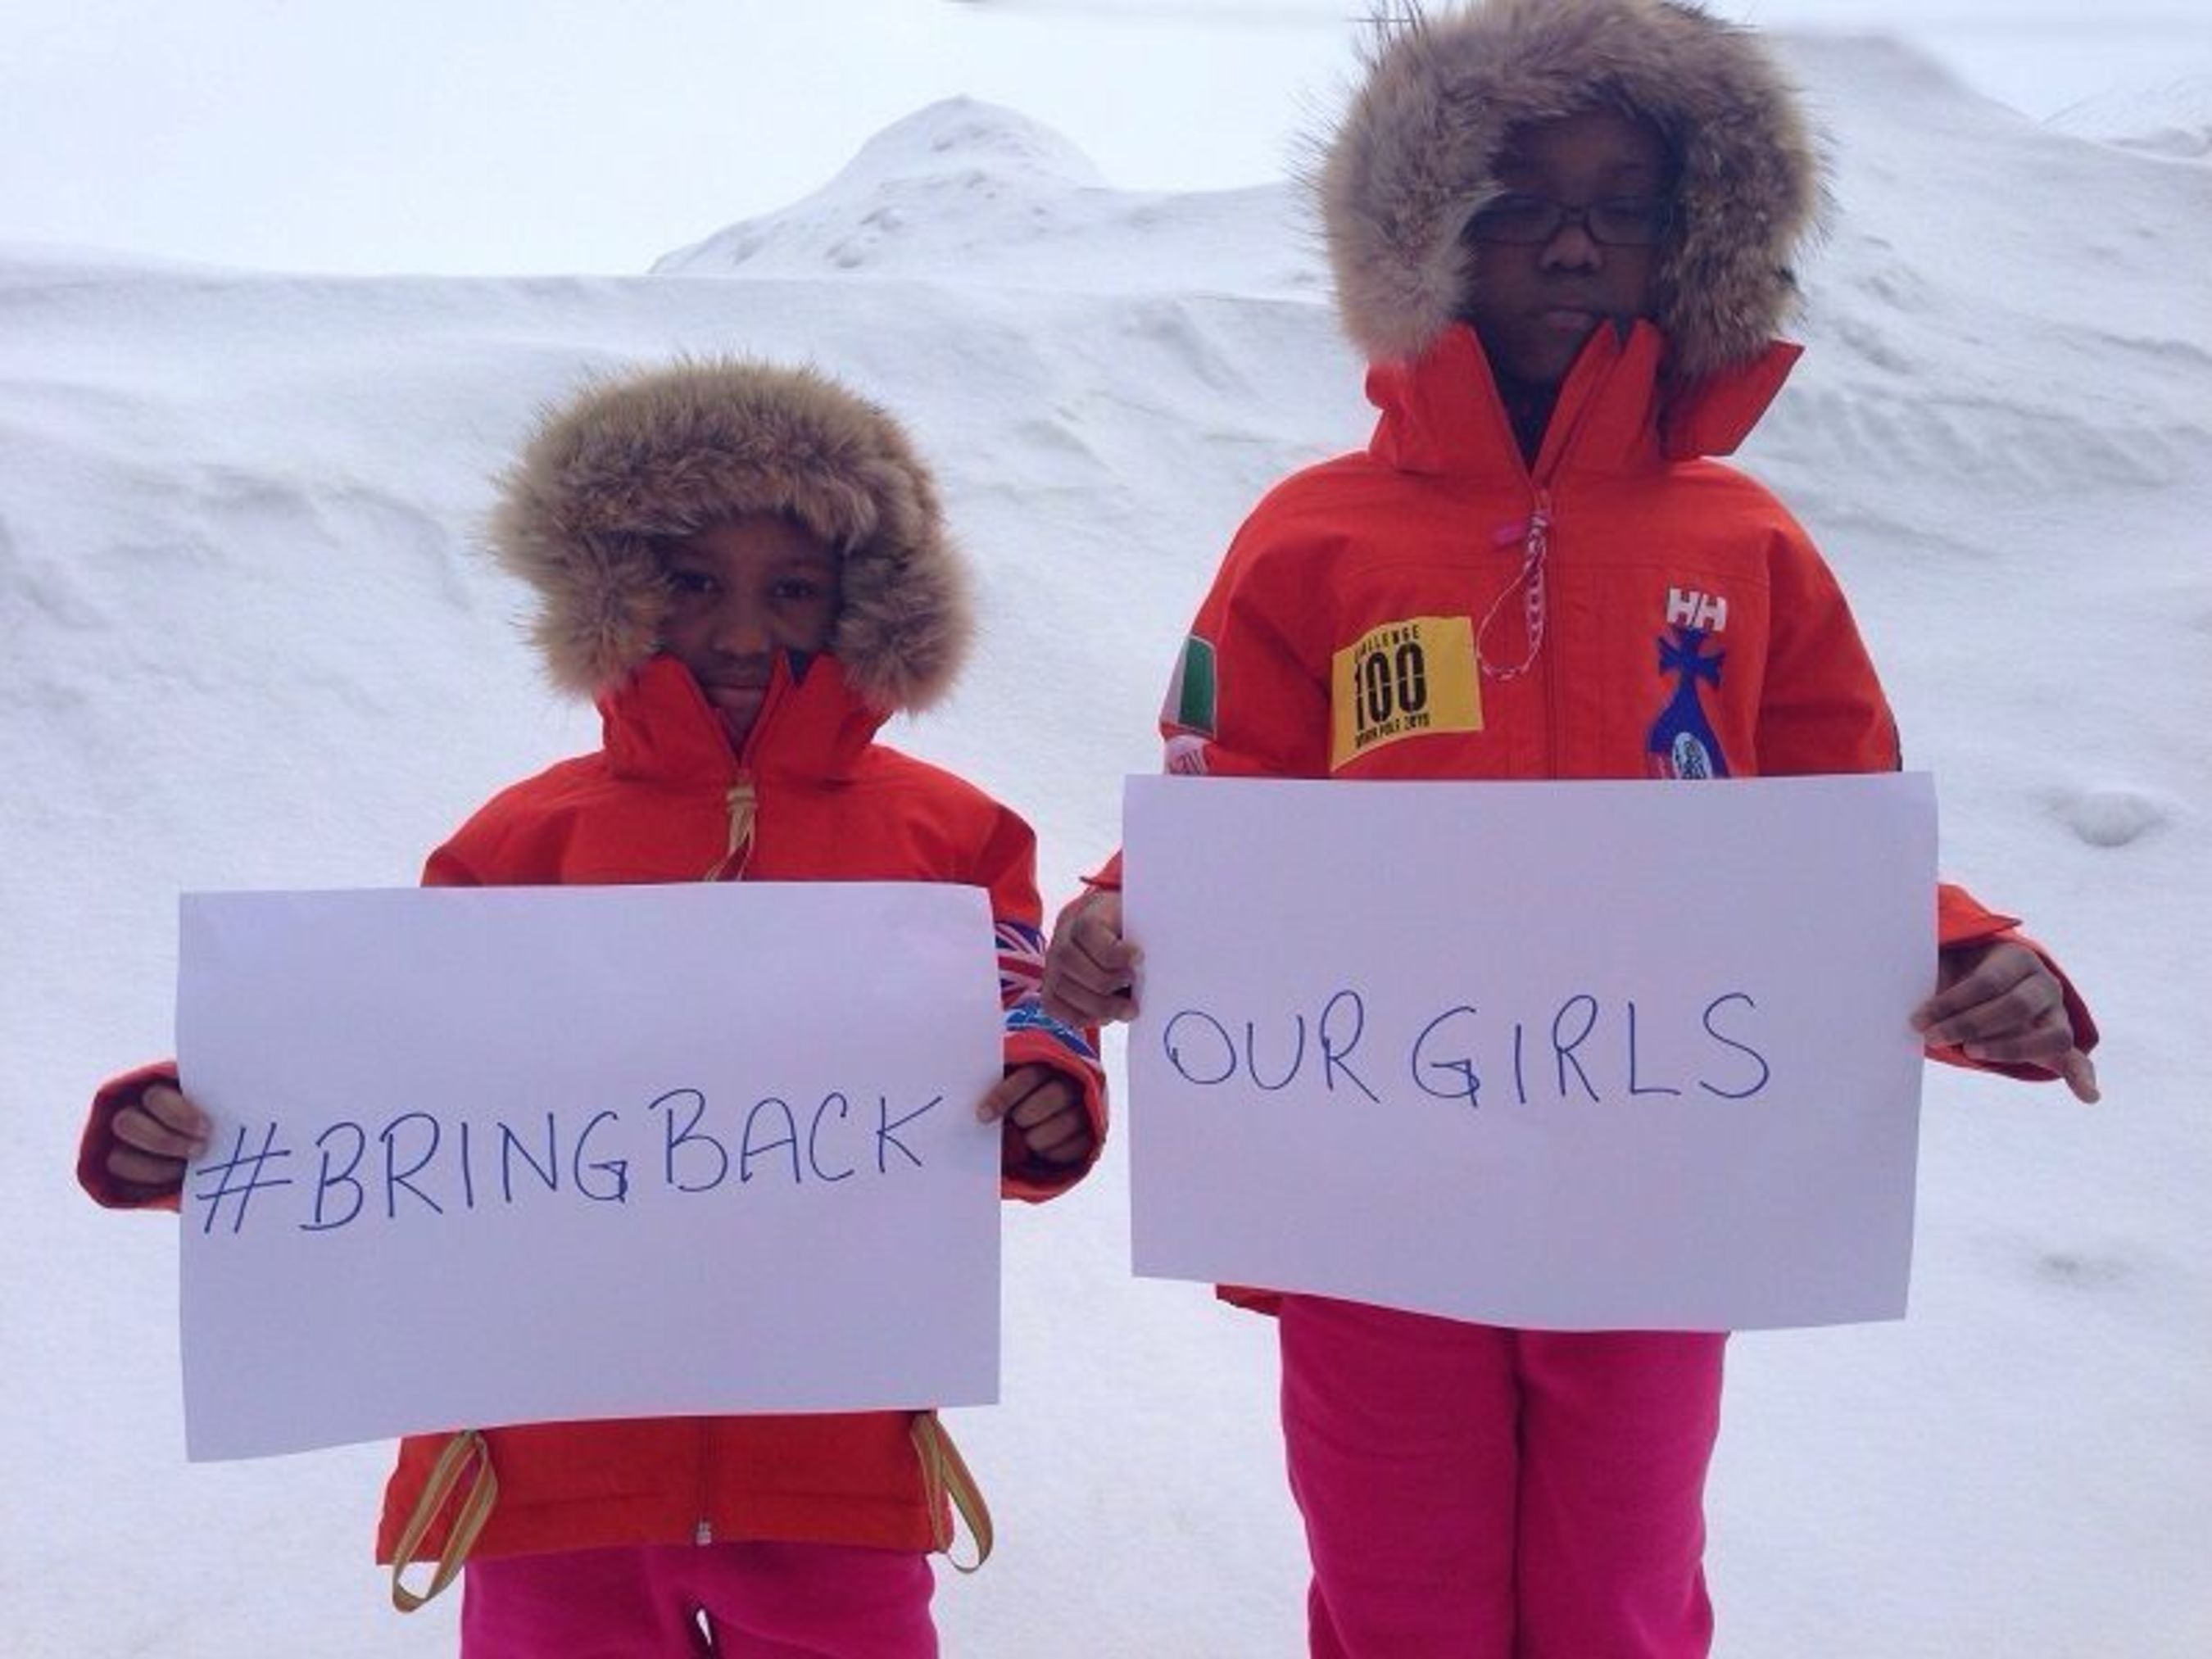 Bring back our Girls: Monica and Aimee Amazu share their message on the anniversary of the Chibok kidnappings. (PRNewsFoto/Challenge 100)